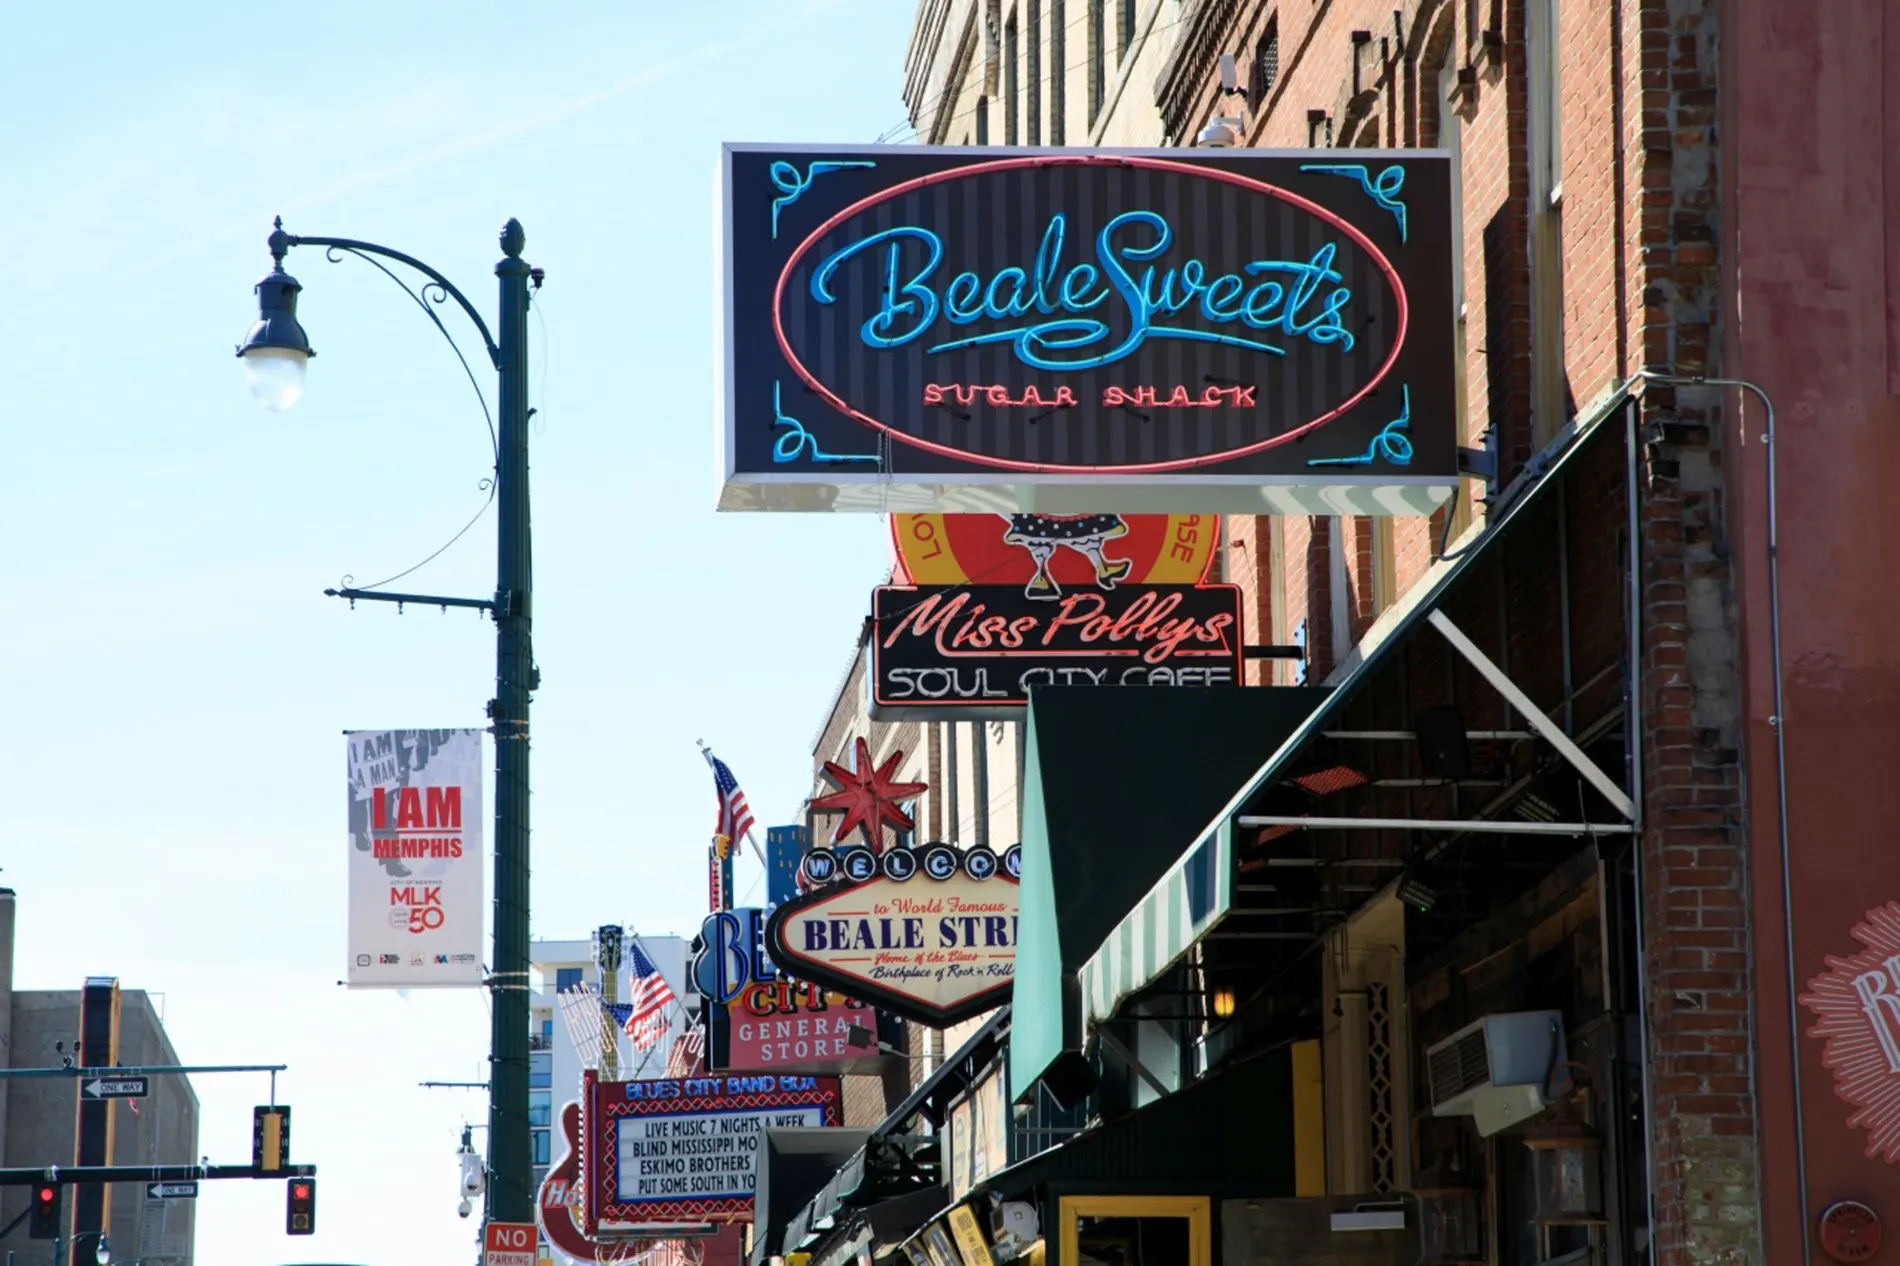 Beale Street in Memphis is well worth a stop off I40.